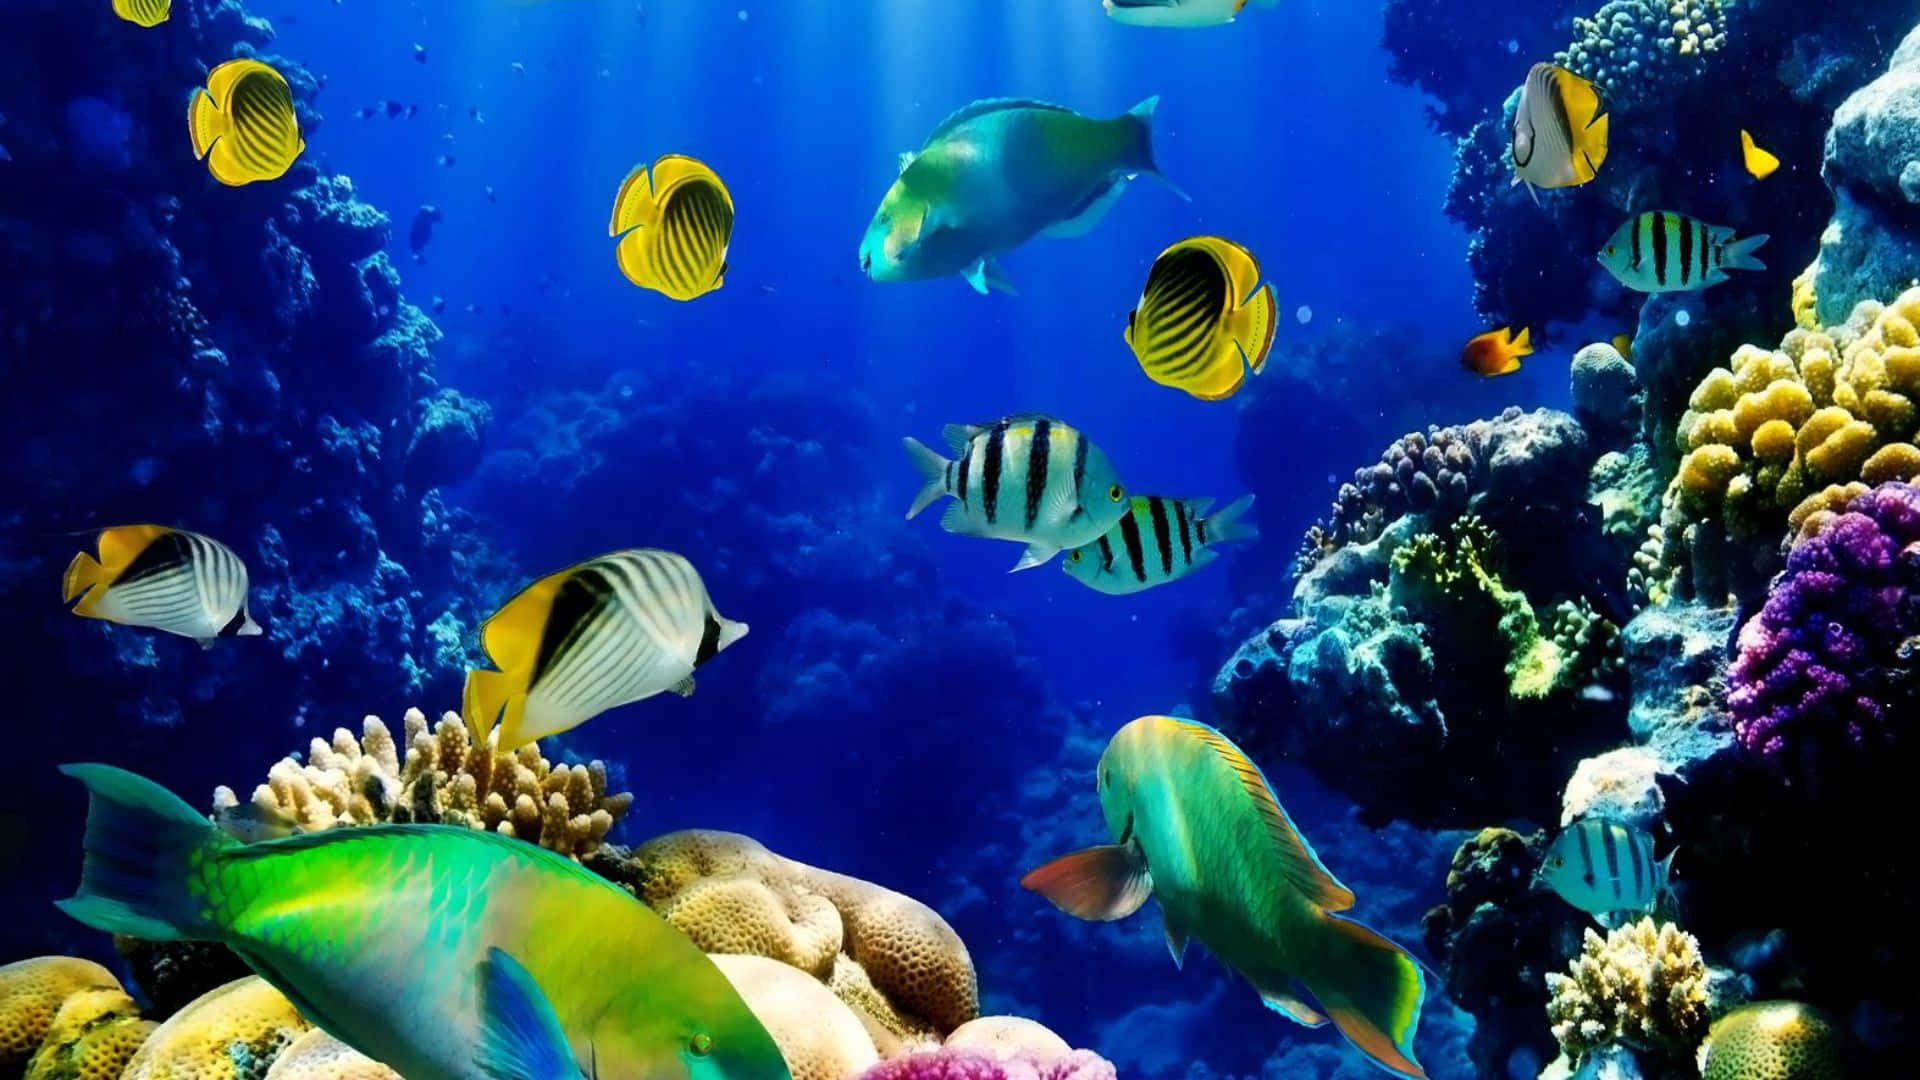 "Lively 3D Fish Tank with Many Fish"